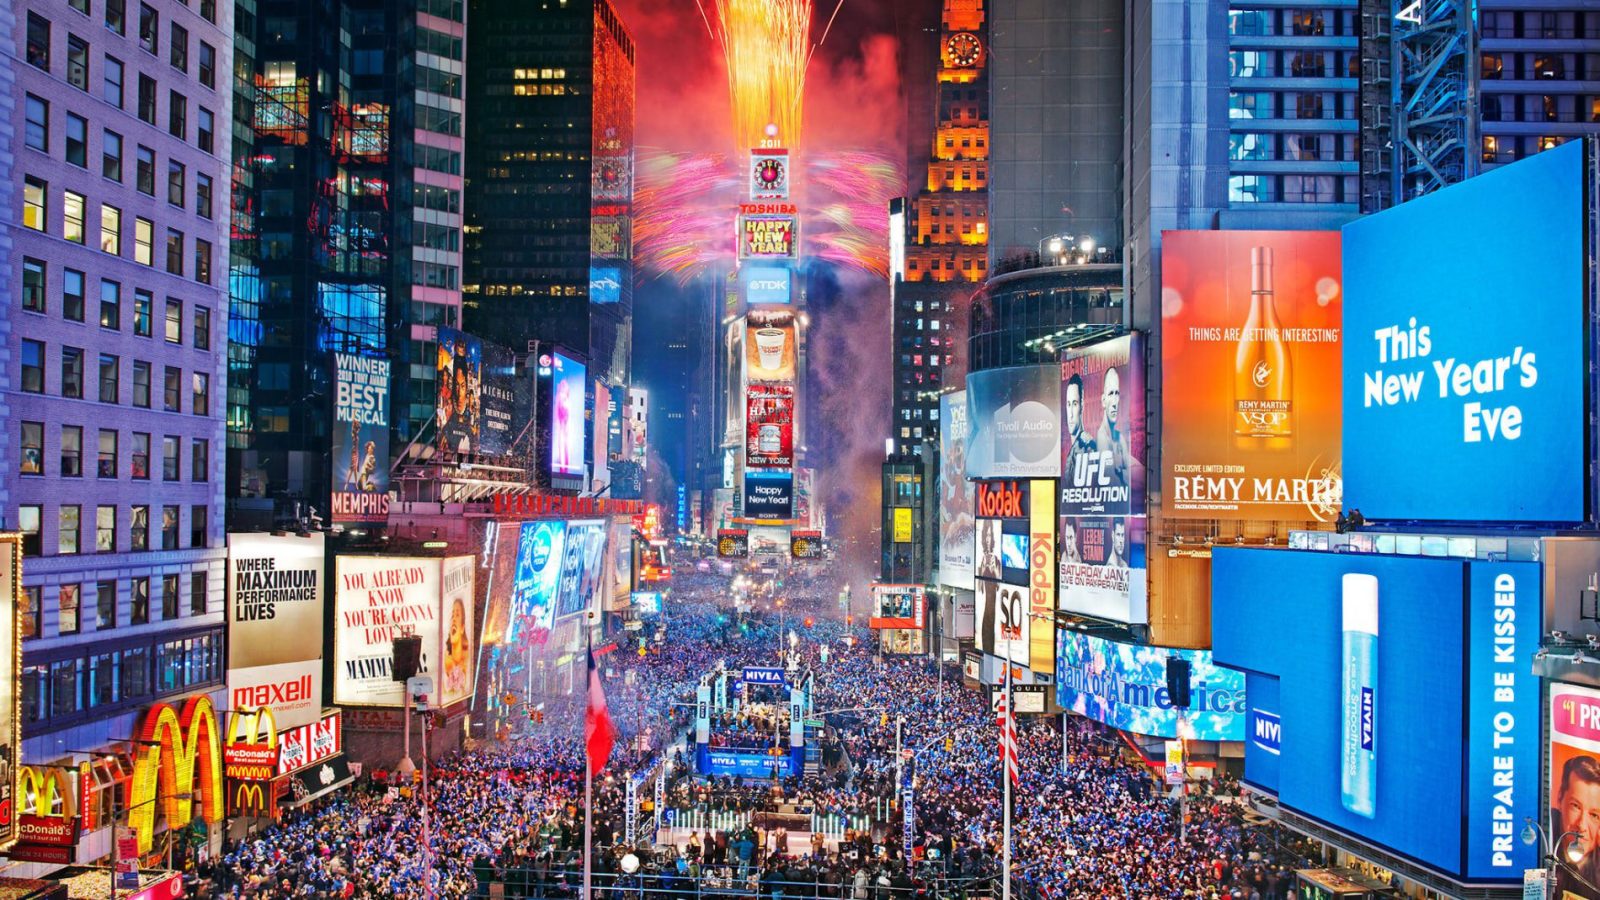 NYPD drones will guard NYE ball drop at Times Square